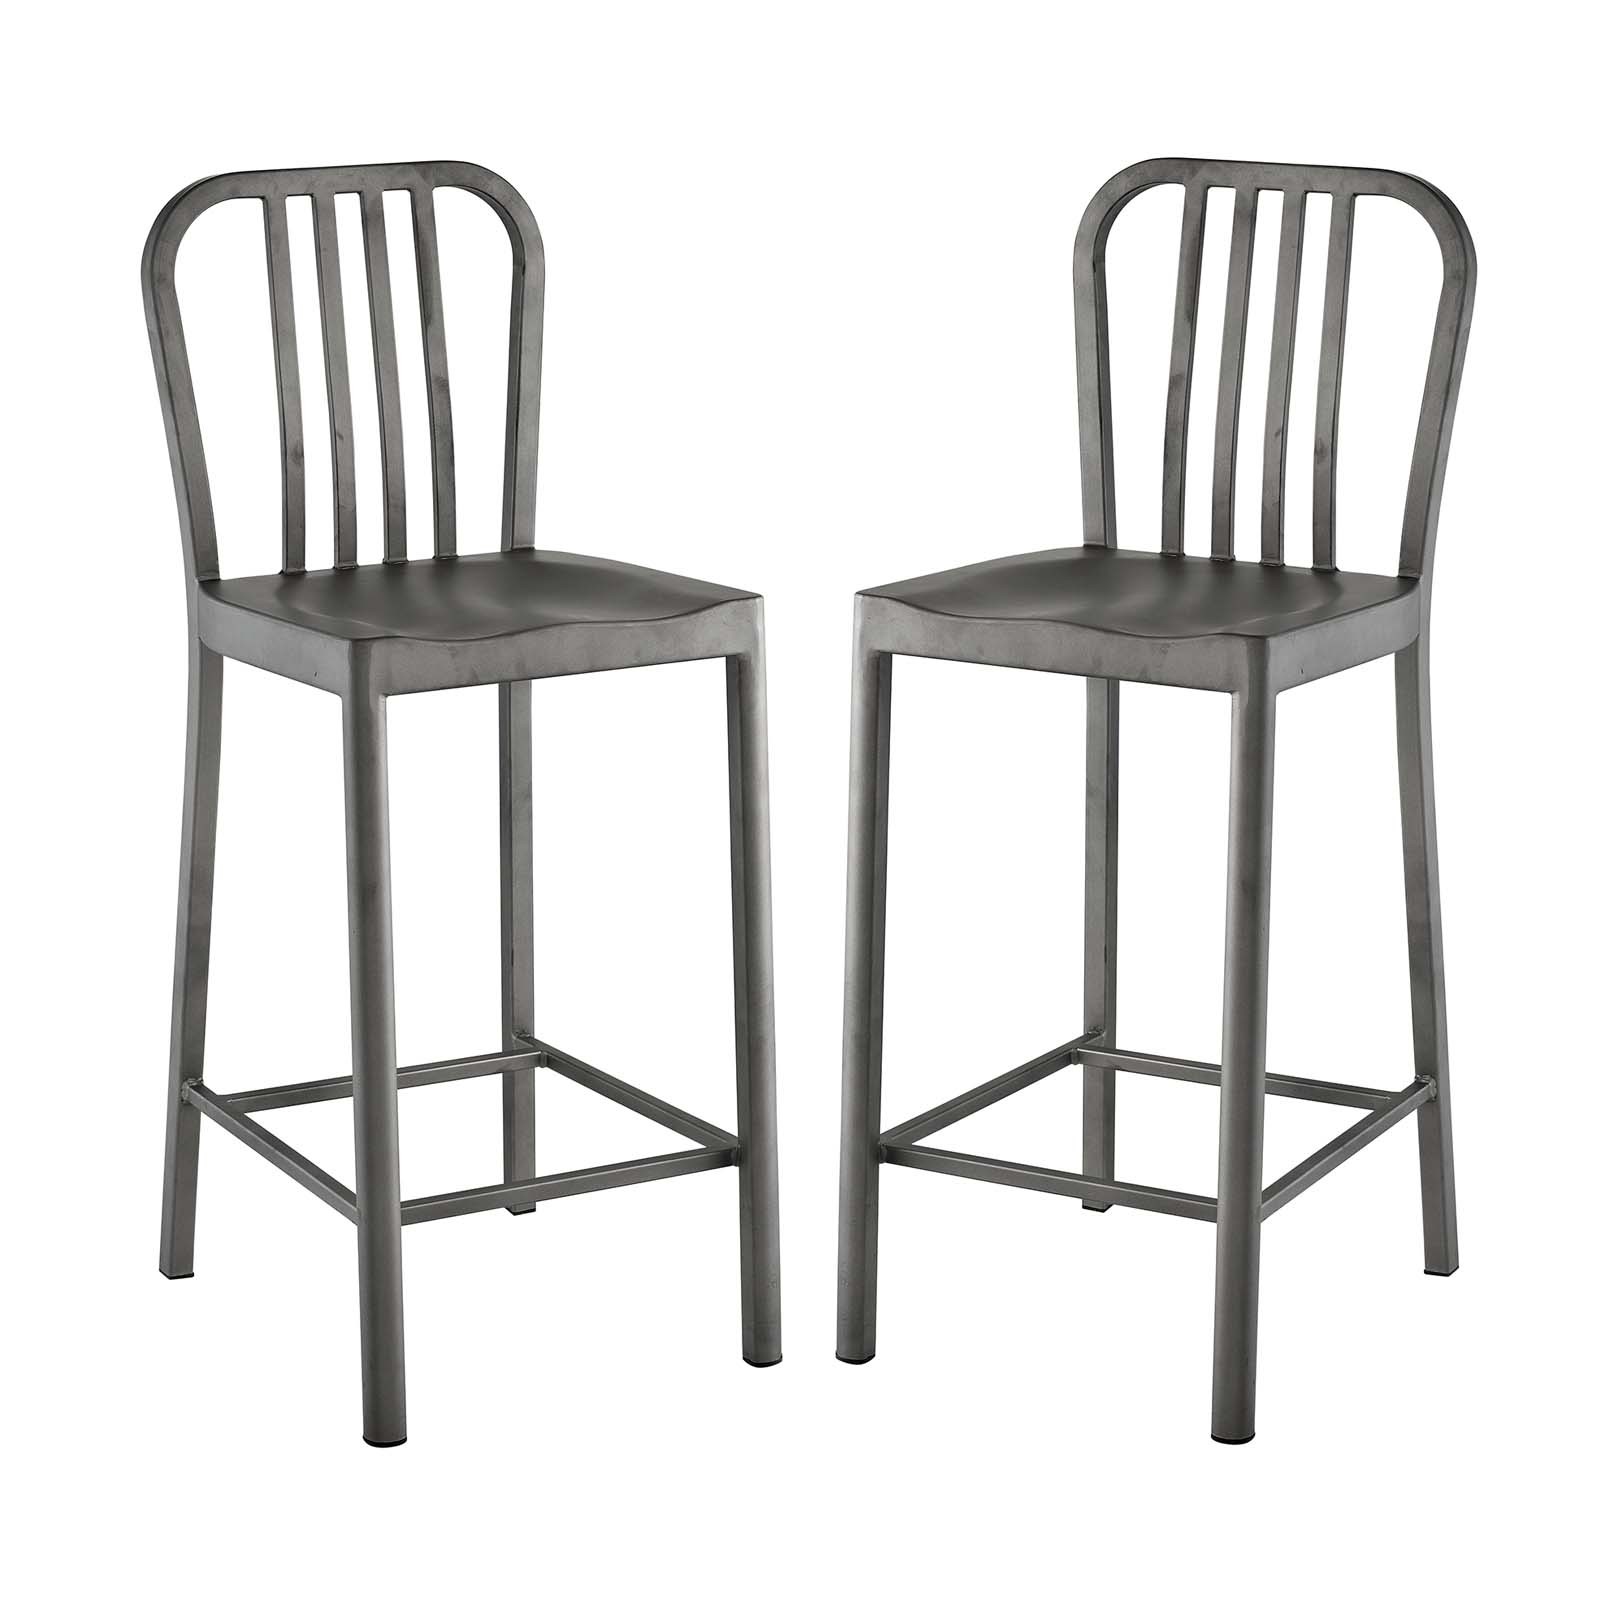 Clink Counter Stool Set of 2 in Silver